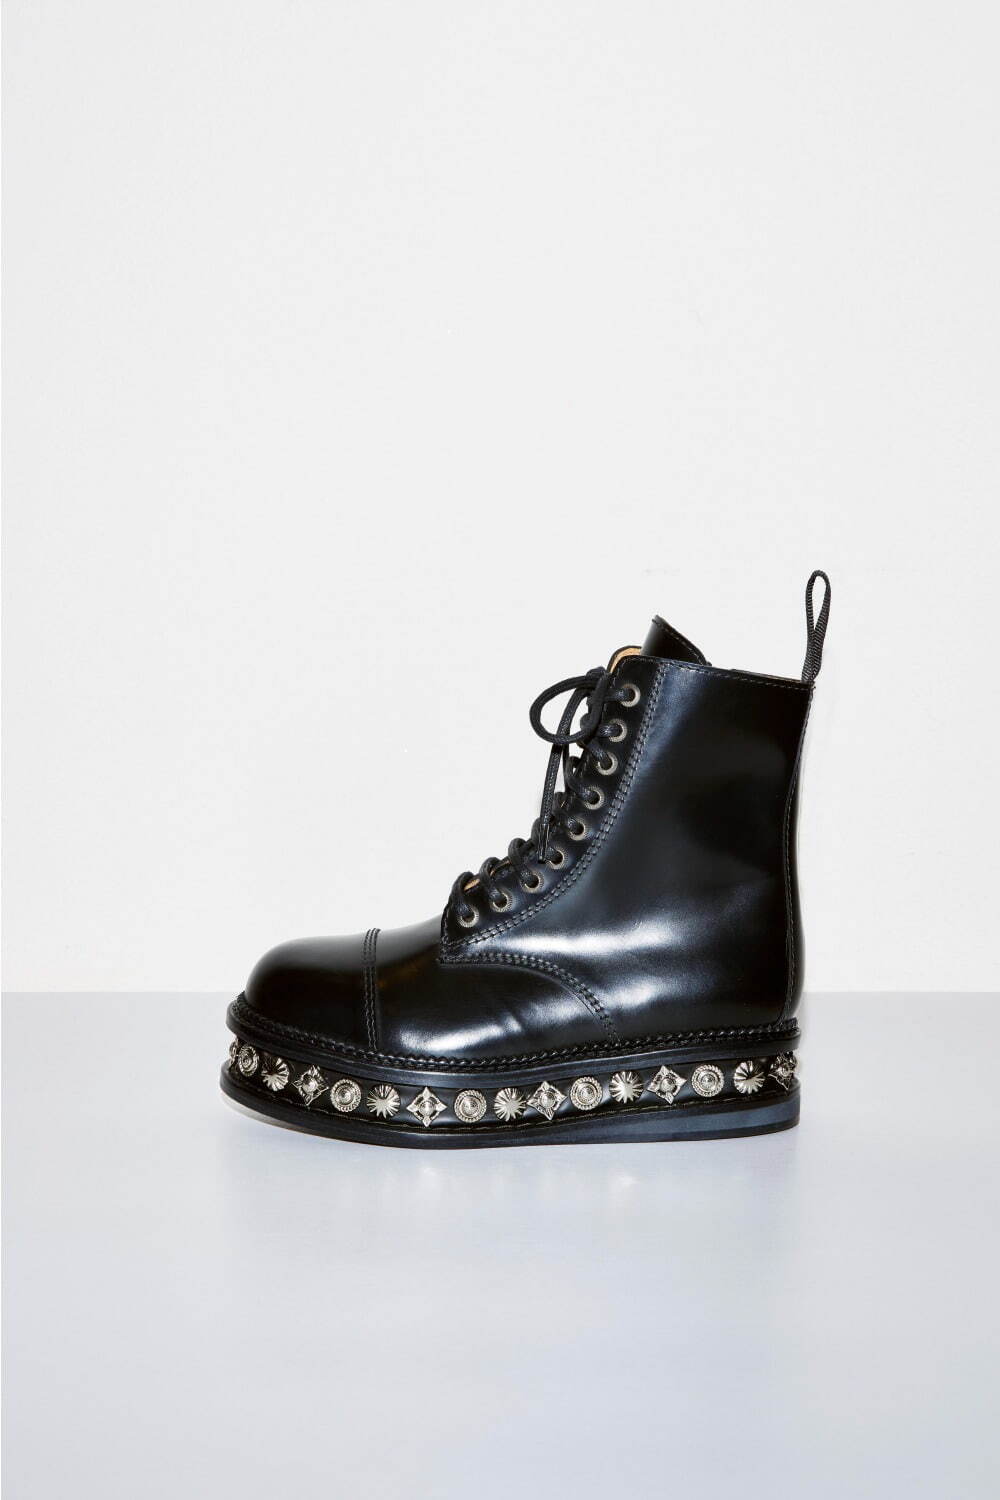 Lace up zip boots 92,000円